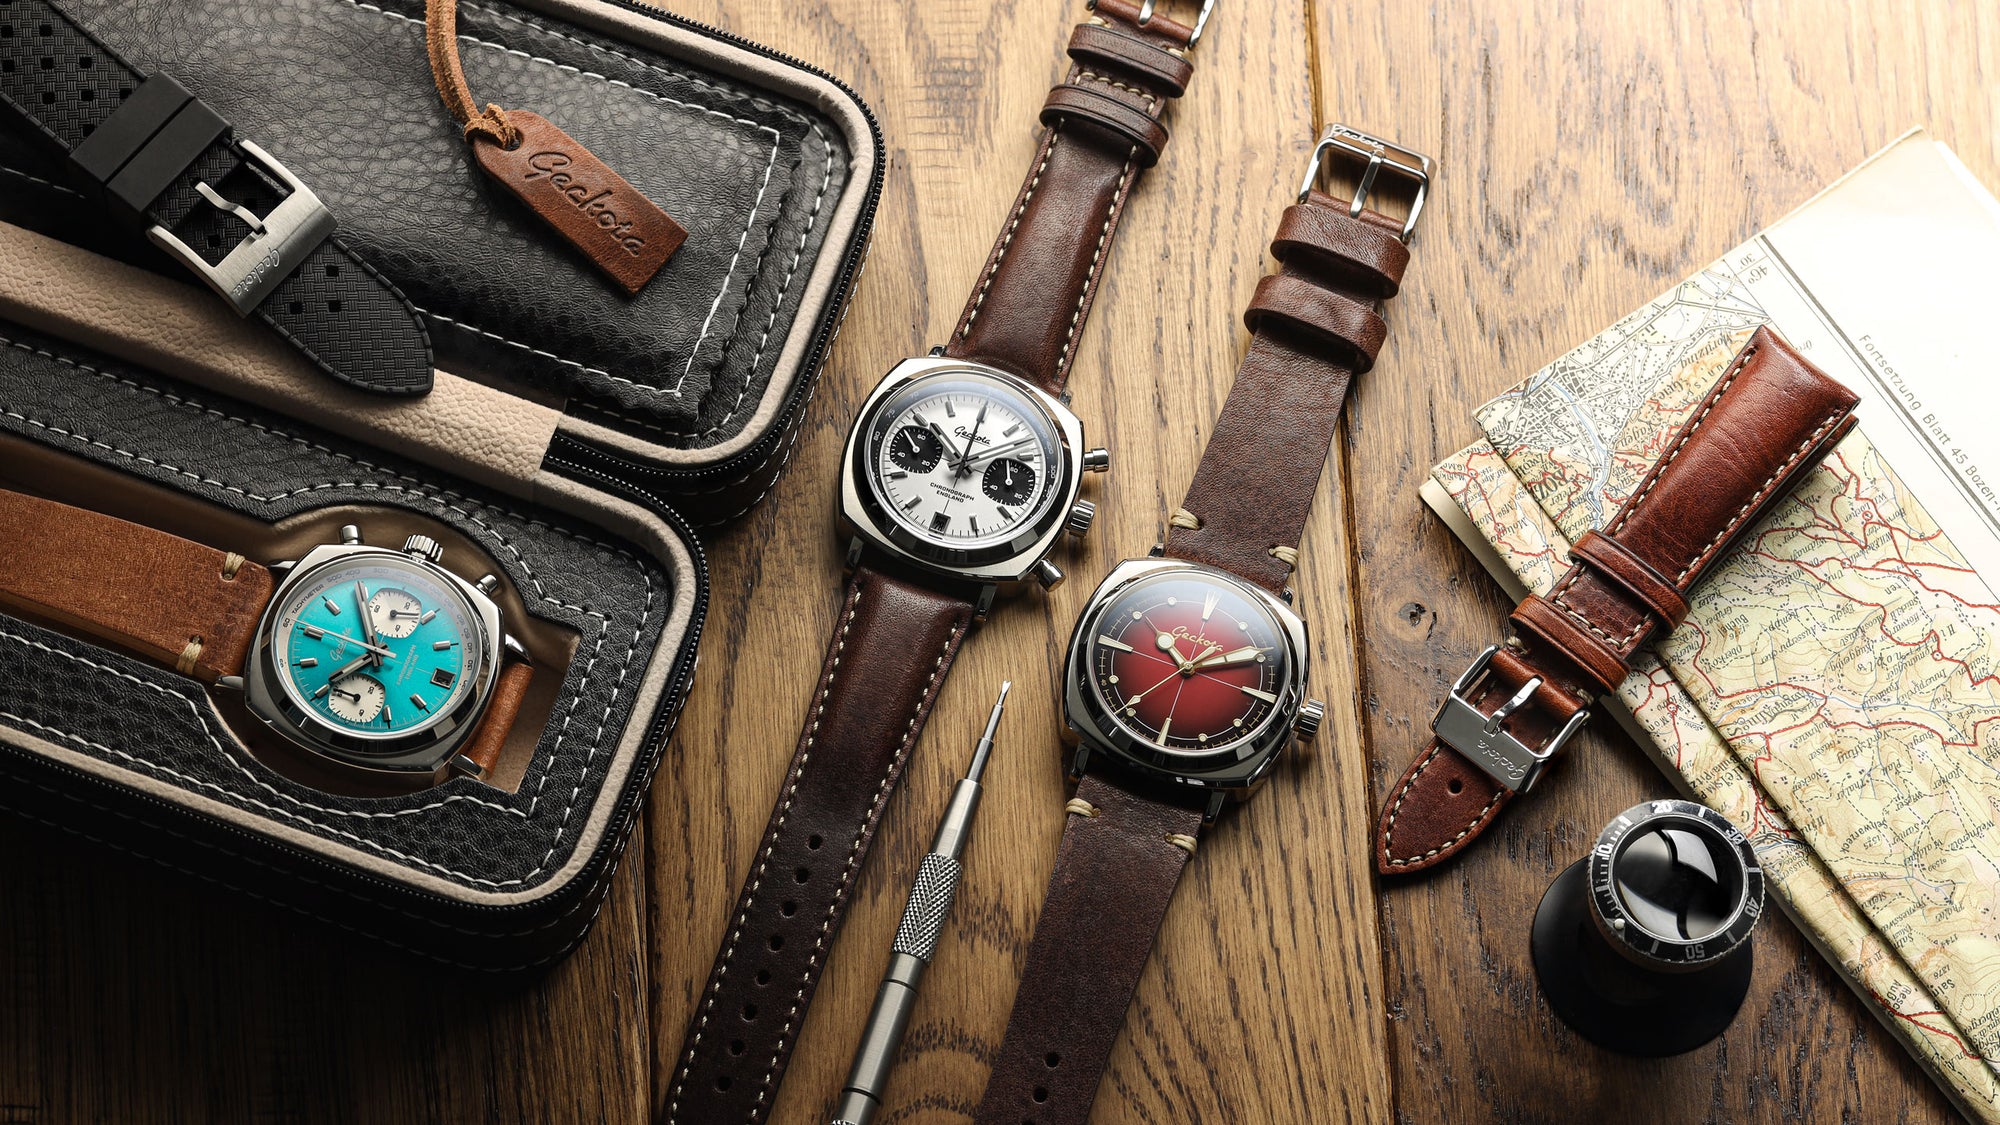 The Geckota Watches Owners Club